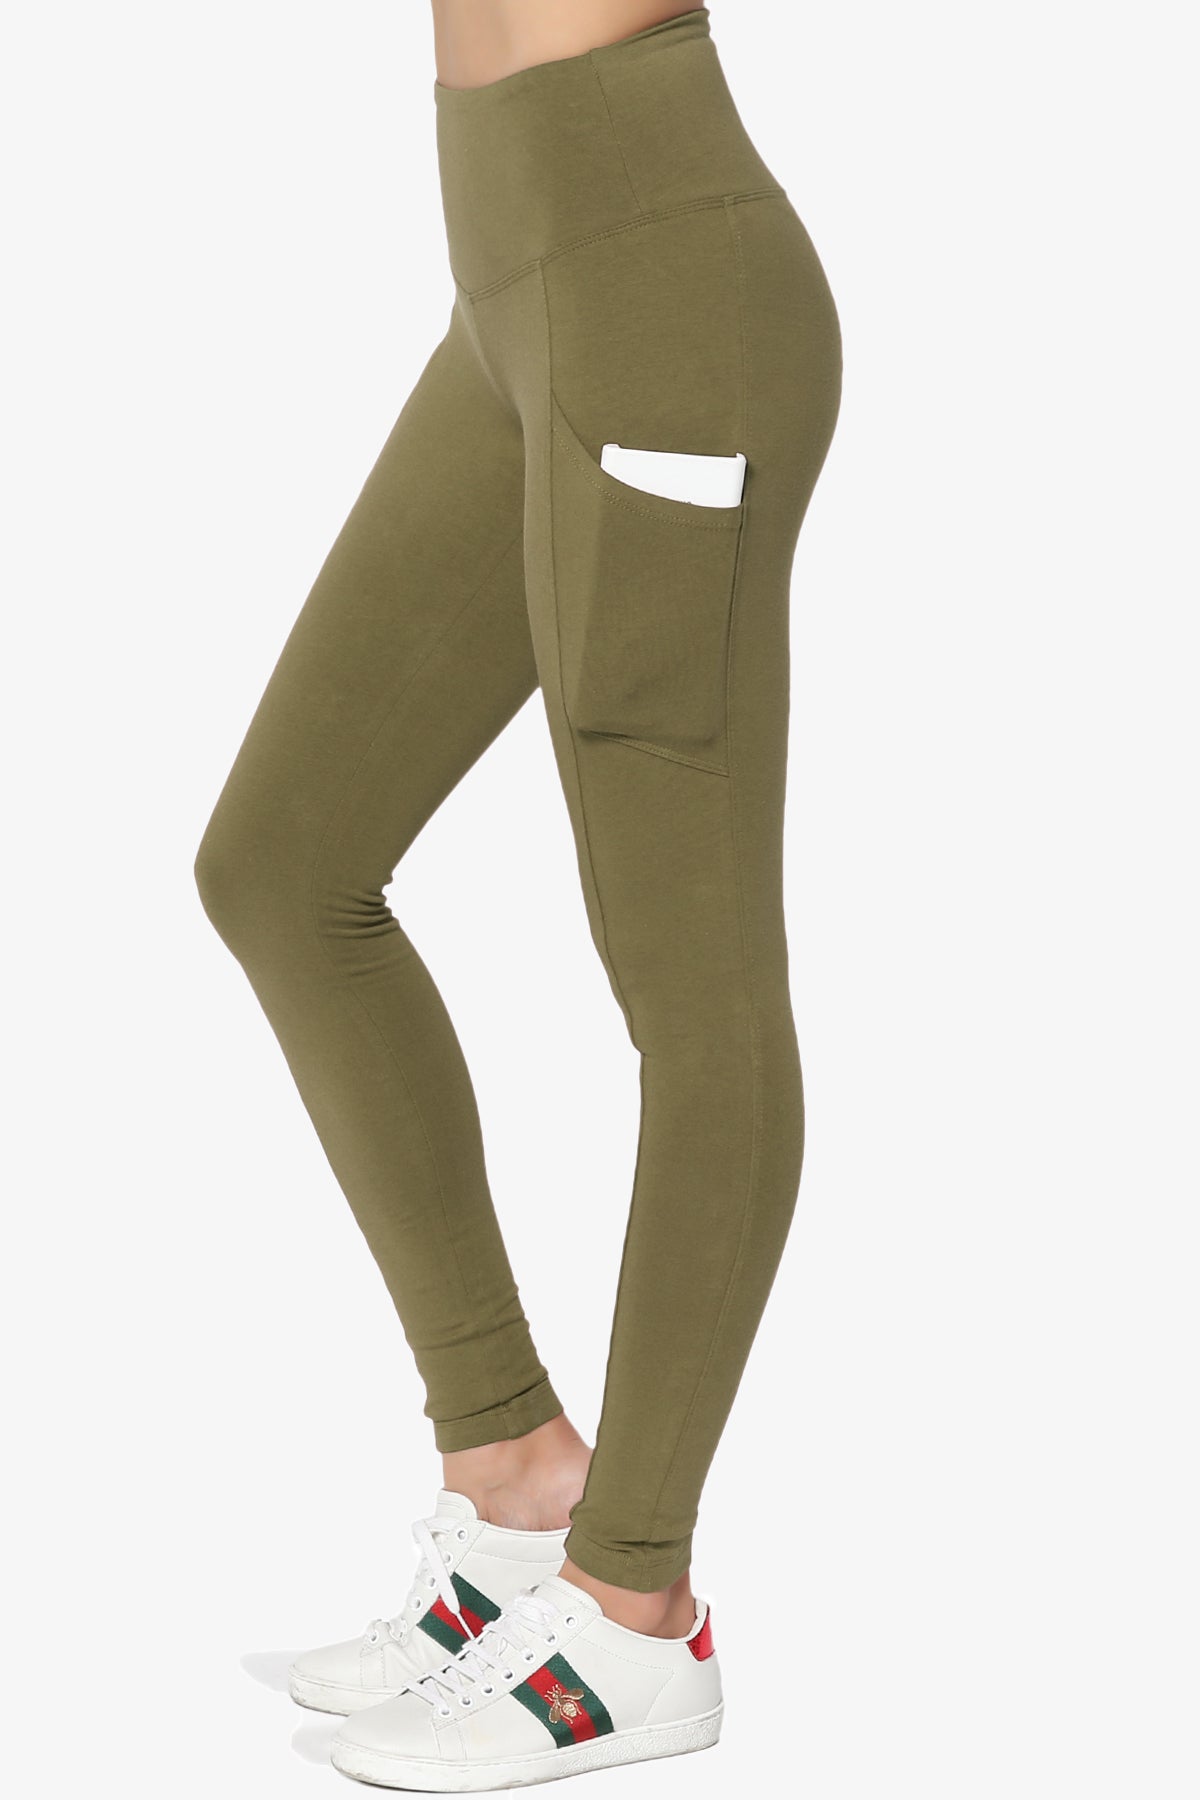 Ansley Luxe Cotton Leggings with Pockets OLIVE KHAKI_1